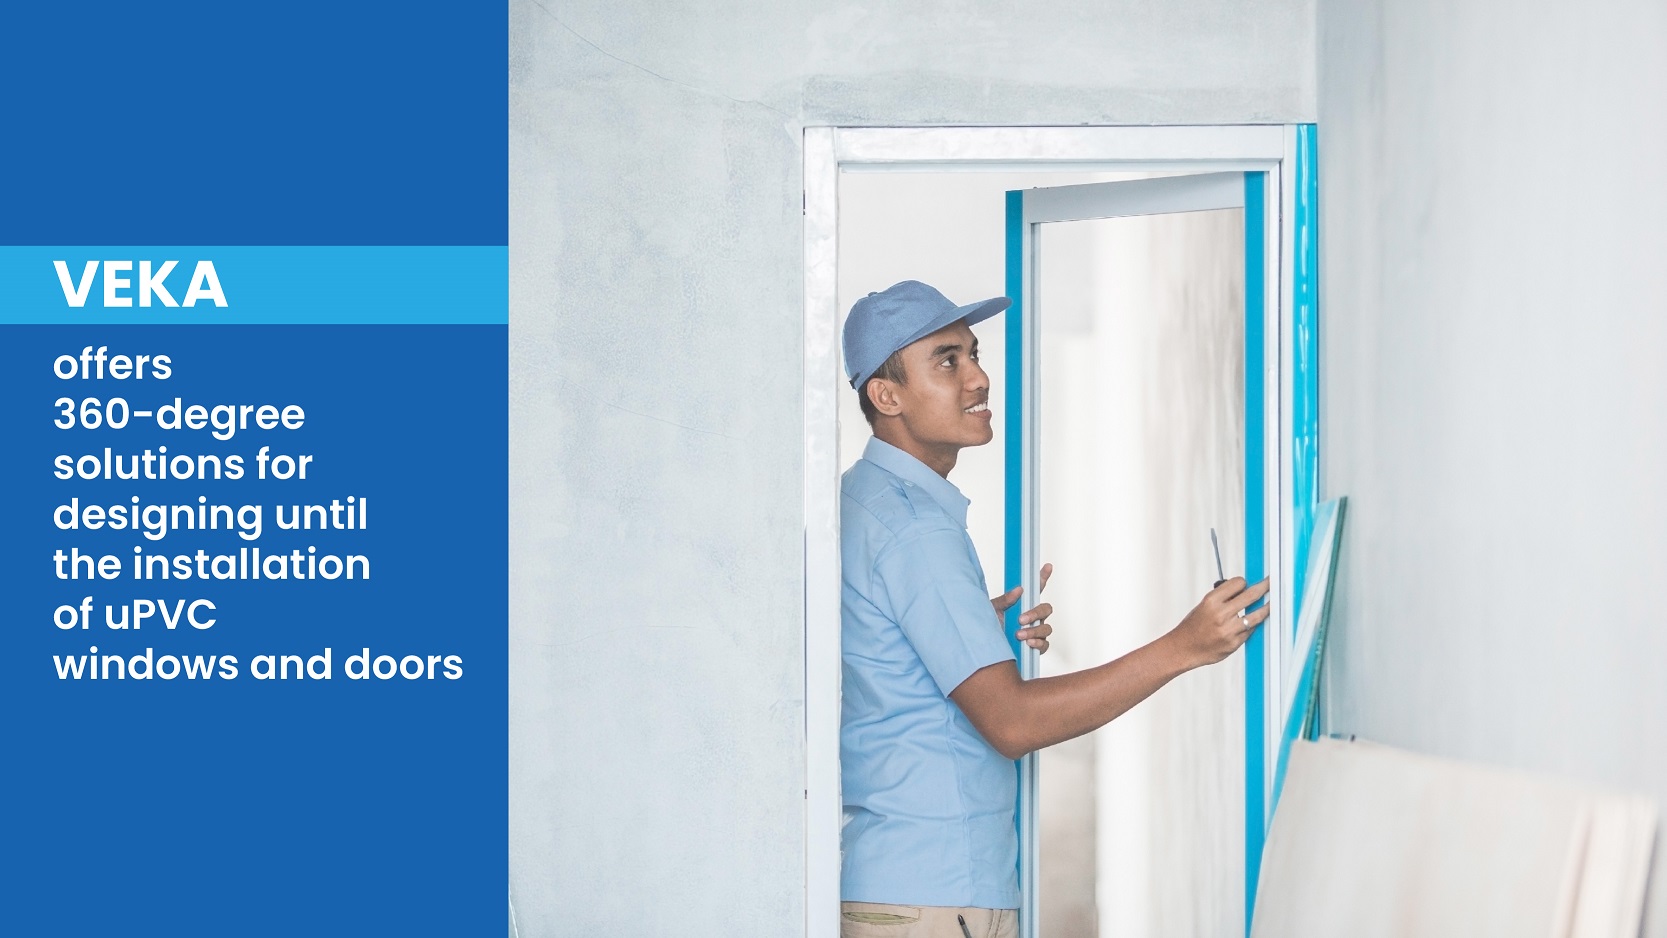 VEKA offers 360-degree solutions for designing until the installation of uPVC windows and doors